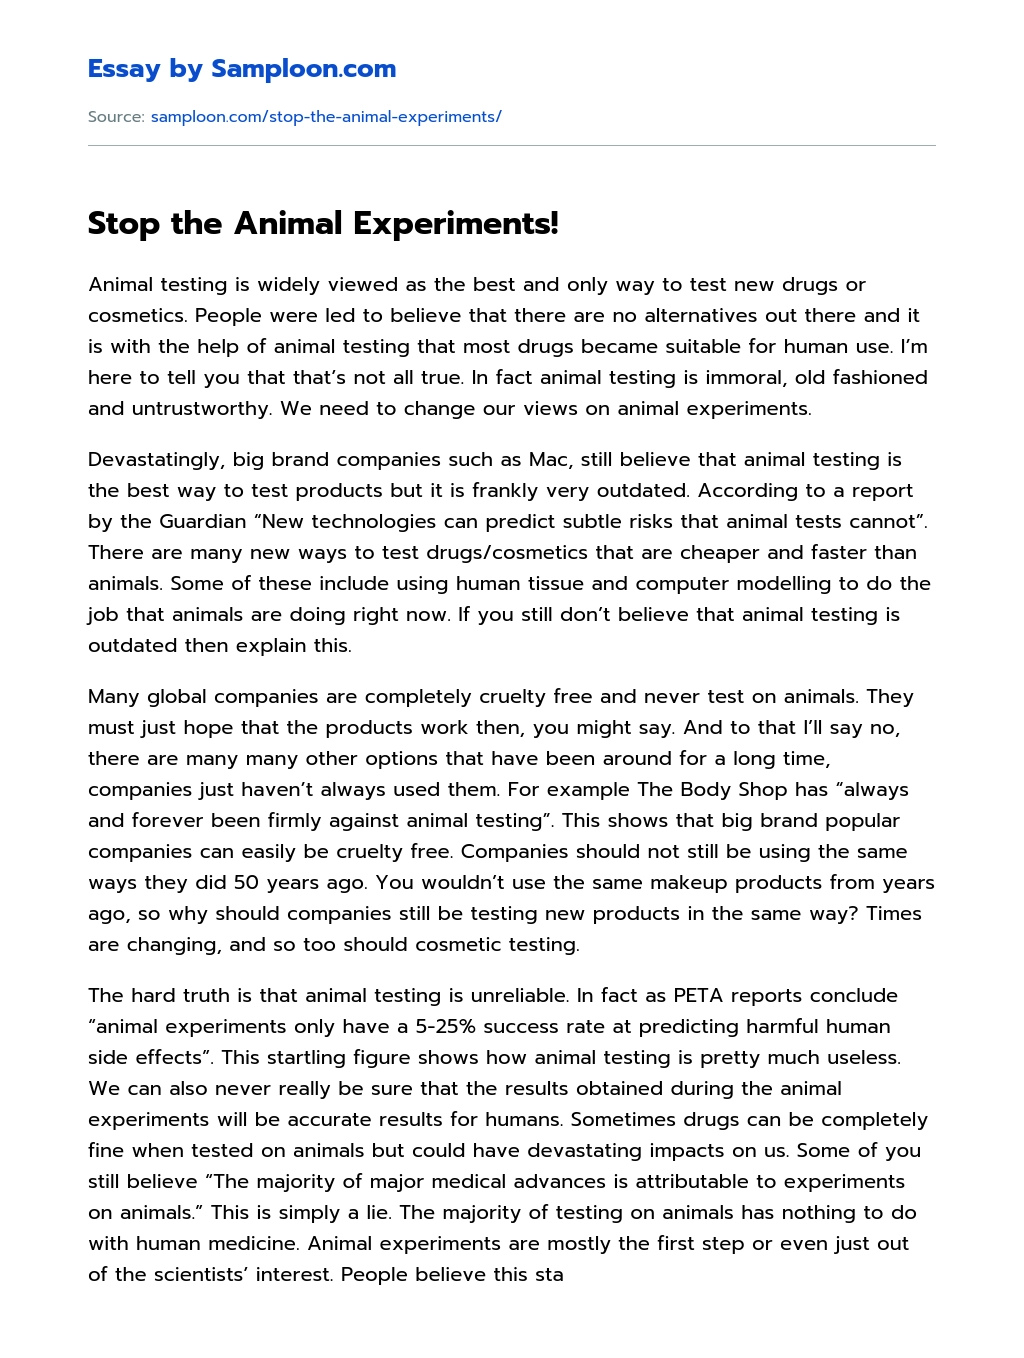 Stop the Animal Experiments! essay